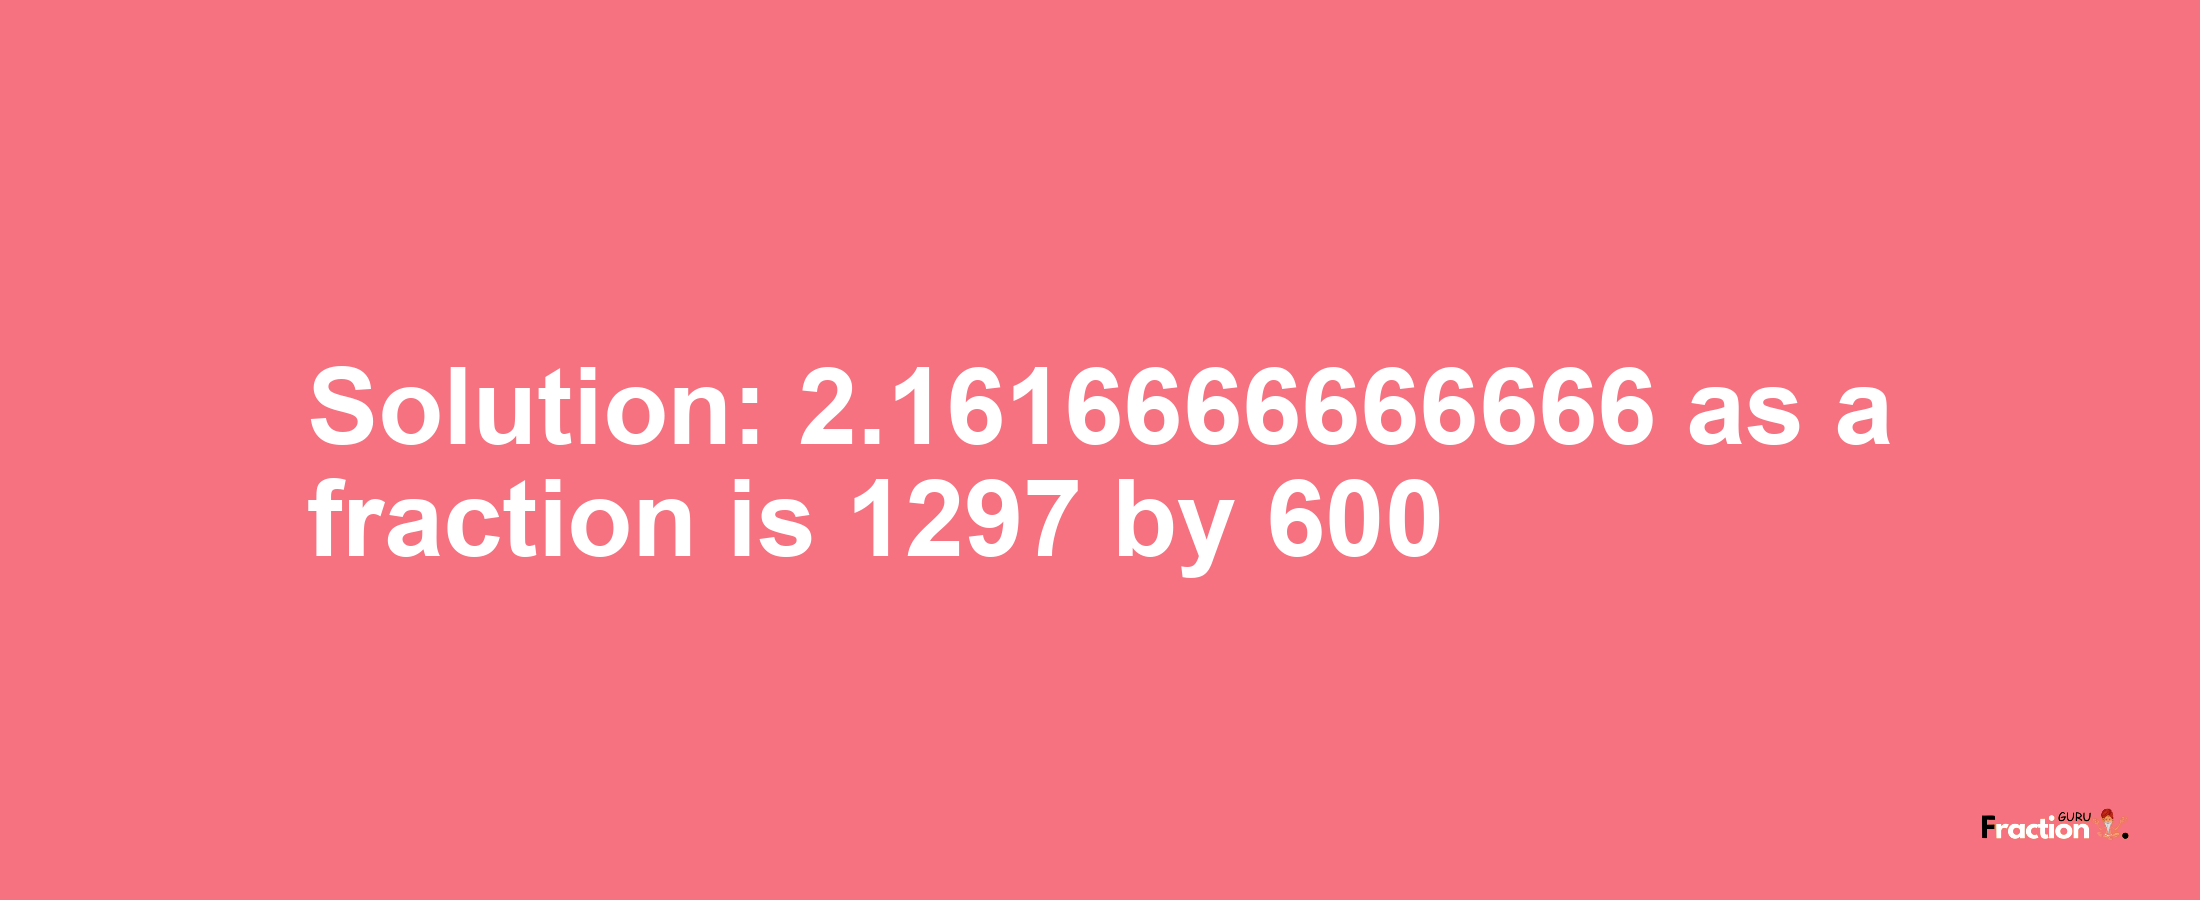 Solution:2.1616666666666 as a fraction is 1297/600